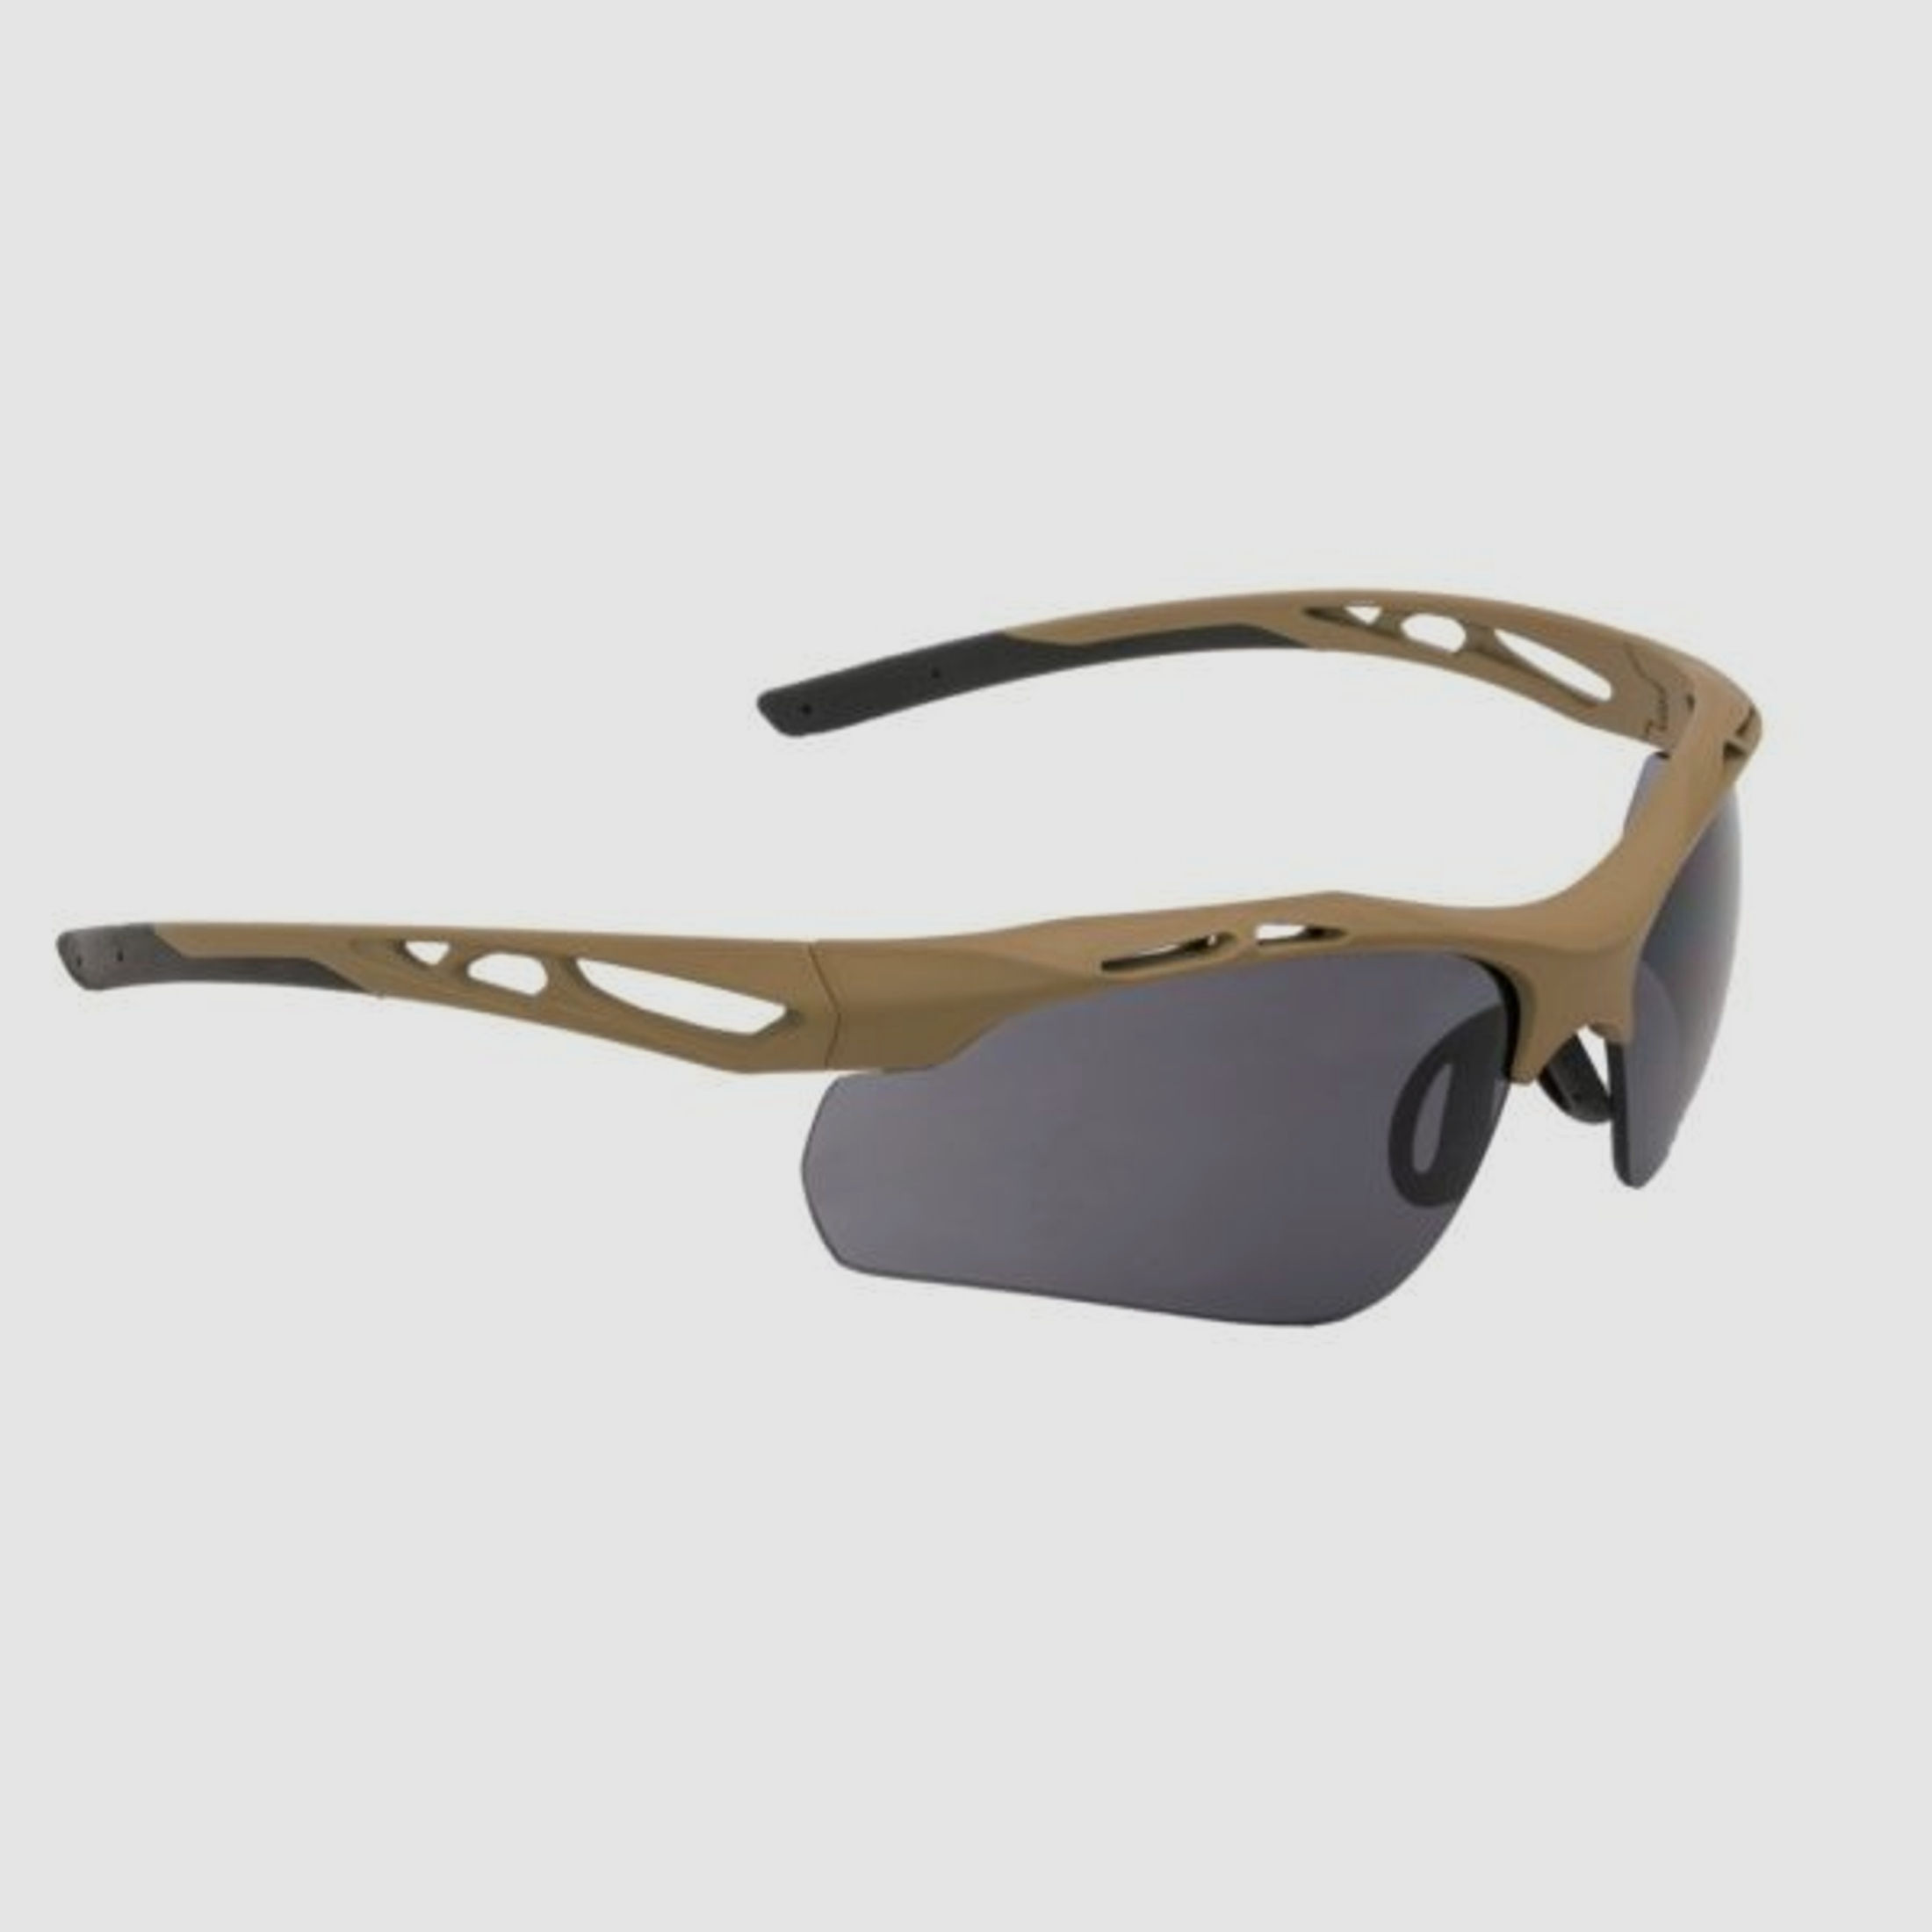 Swisseye Tactical Brille ATTAC